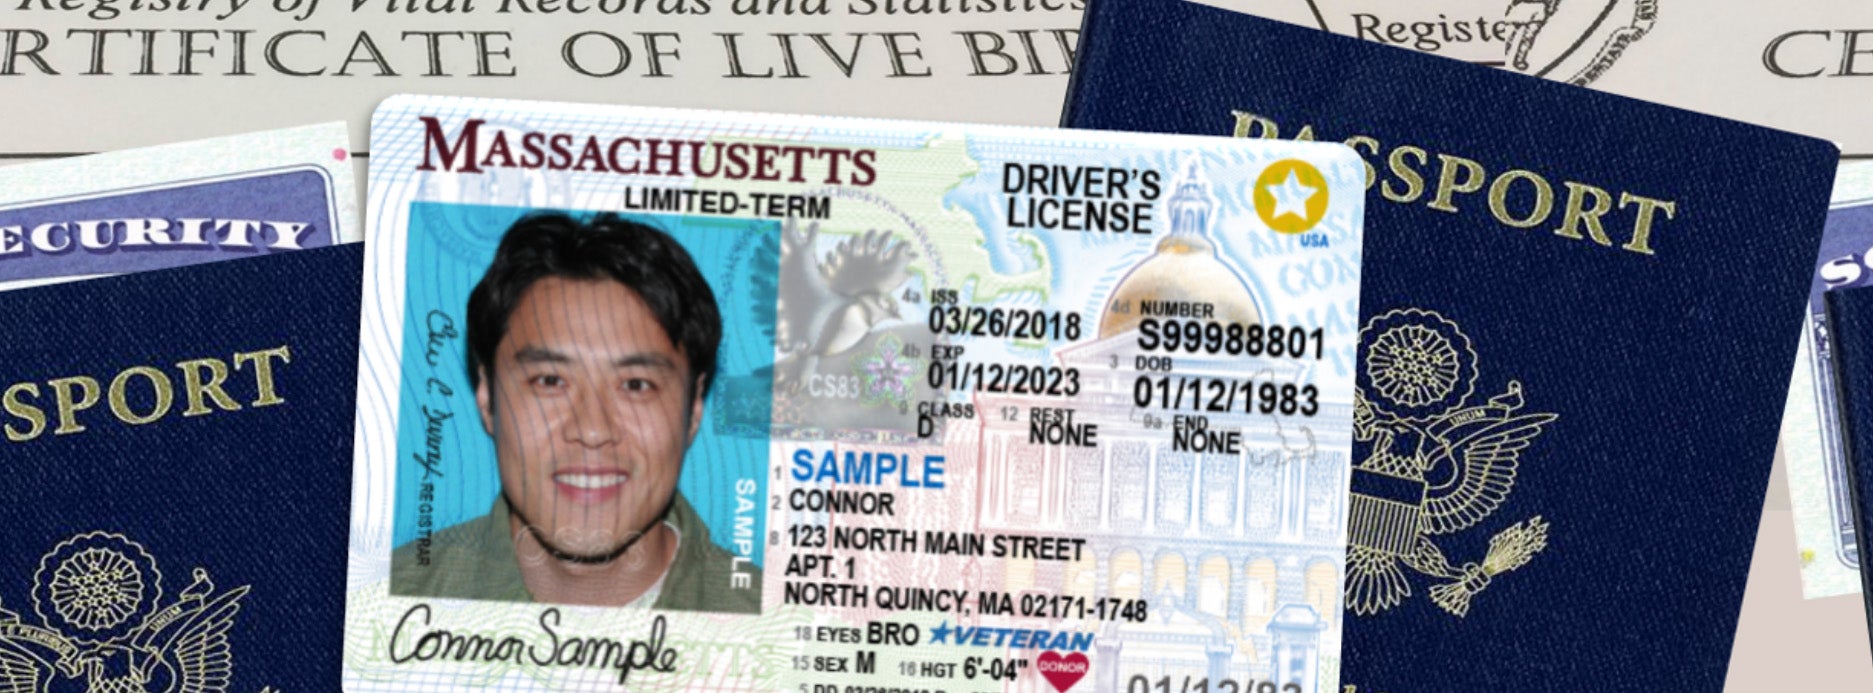 What Massachusetts Travelers Need to Know About REAL ID